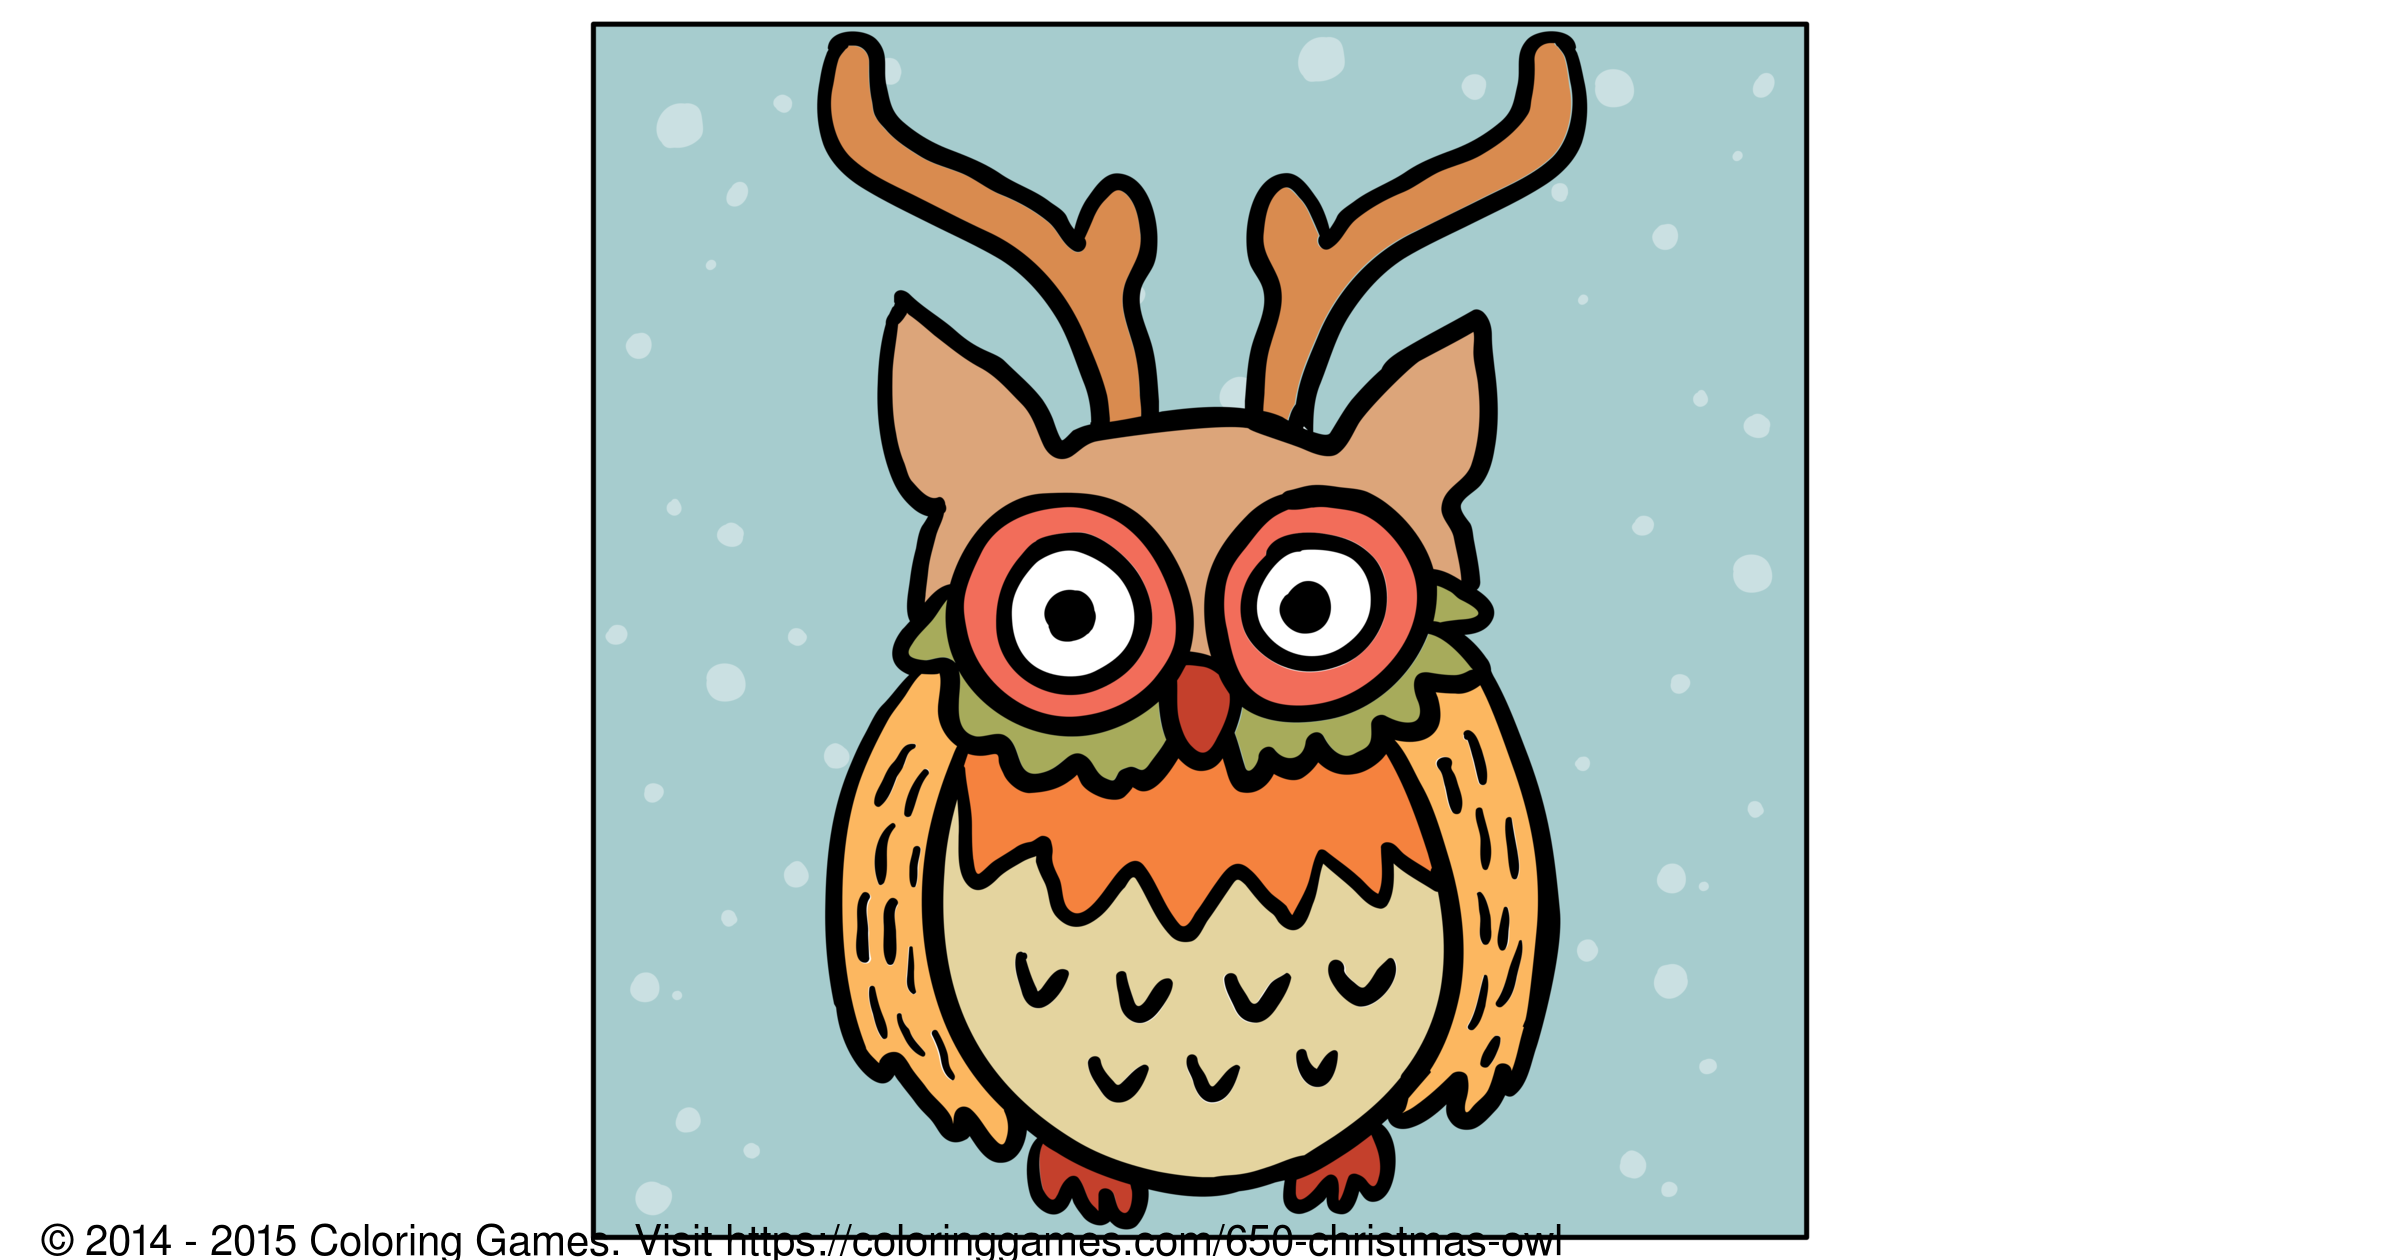 Christmas Owl - Coloring Games and Coloring Pages